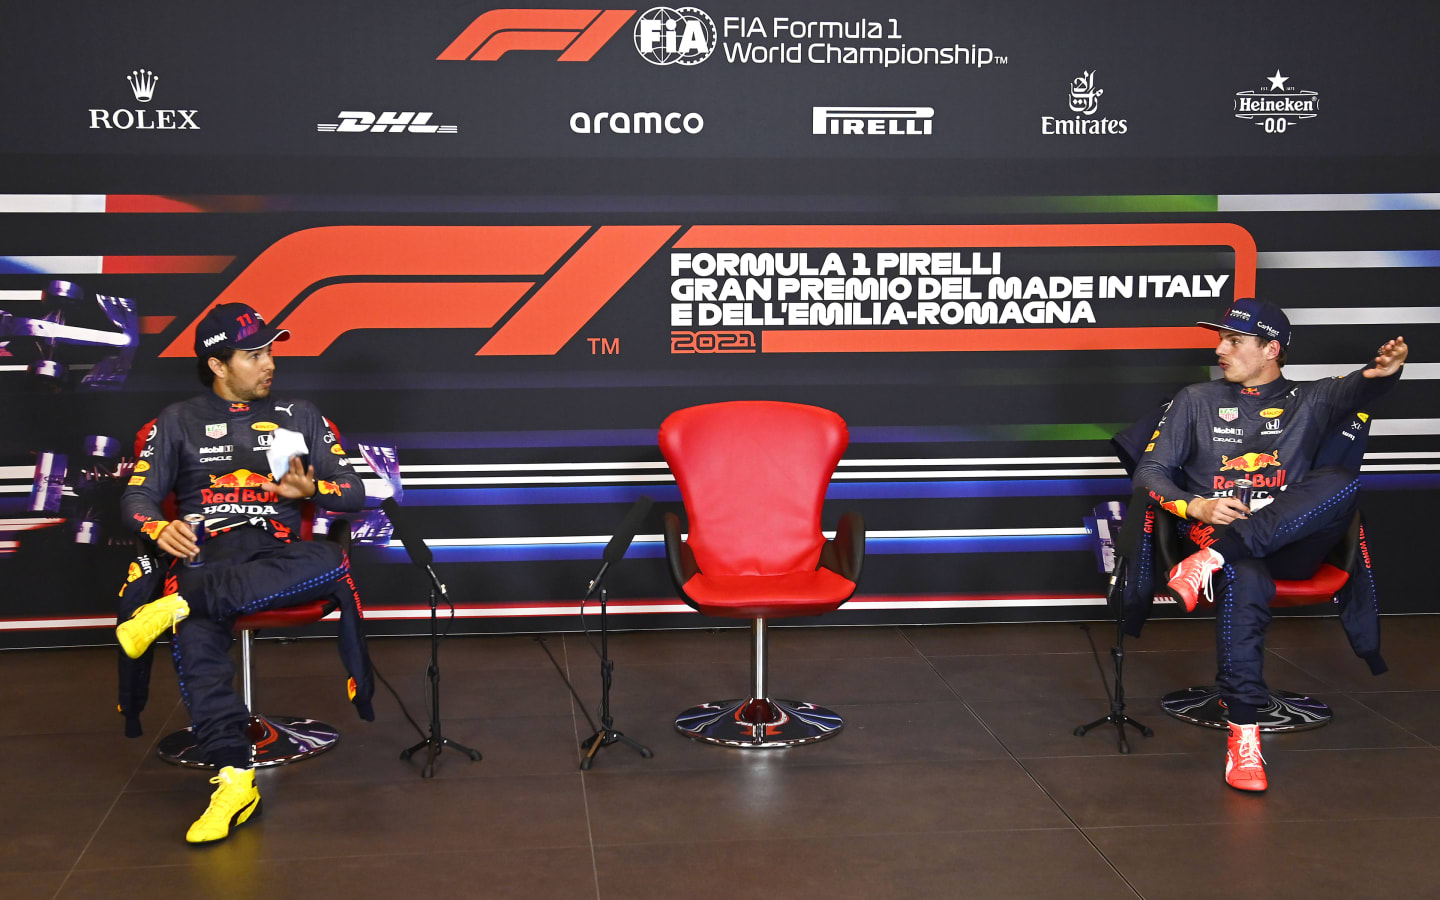 IMOLA, ITALY - APRIL 17:  Second place qualifier Sergio Perez of Mexico and Red Bull Racing and Third place qualifier Max Verstappen of Netherlands and Red Bull Racing wait for Pole position qualifier Lewis Hamilton of Great Britain and Mercedes GP during a press conference after qualifying ahead of the F1 Grand Prix of Emilia Romagna at Autodromo Enzo e Dino Ferrari on April 17, 2021 in Imola, Italy. (Photo by Mark Sutton - Pool/Getty Images)